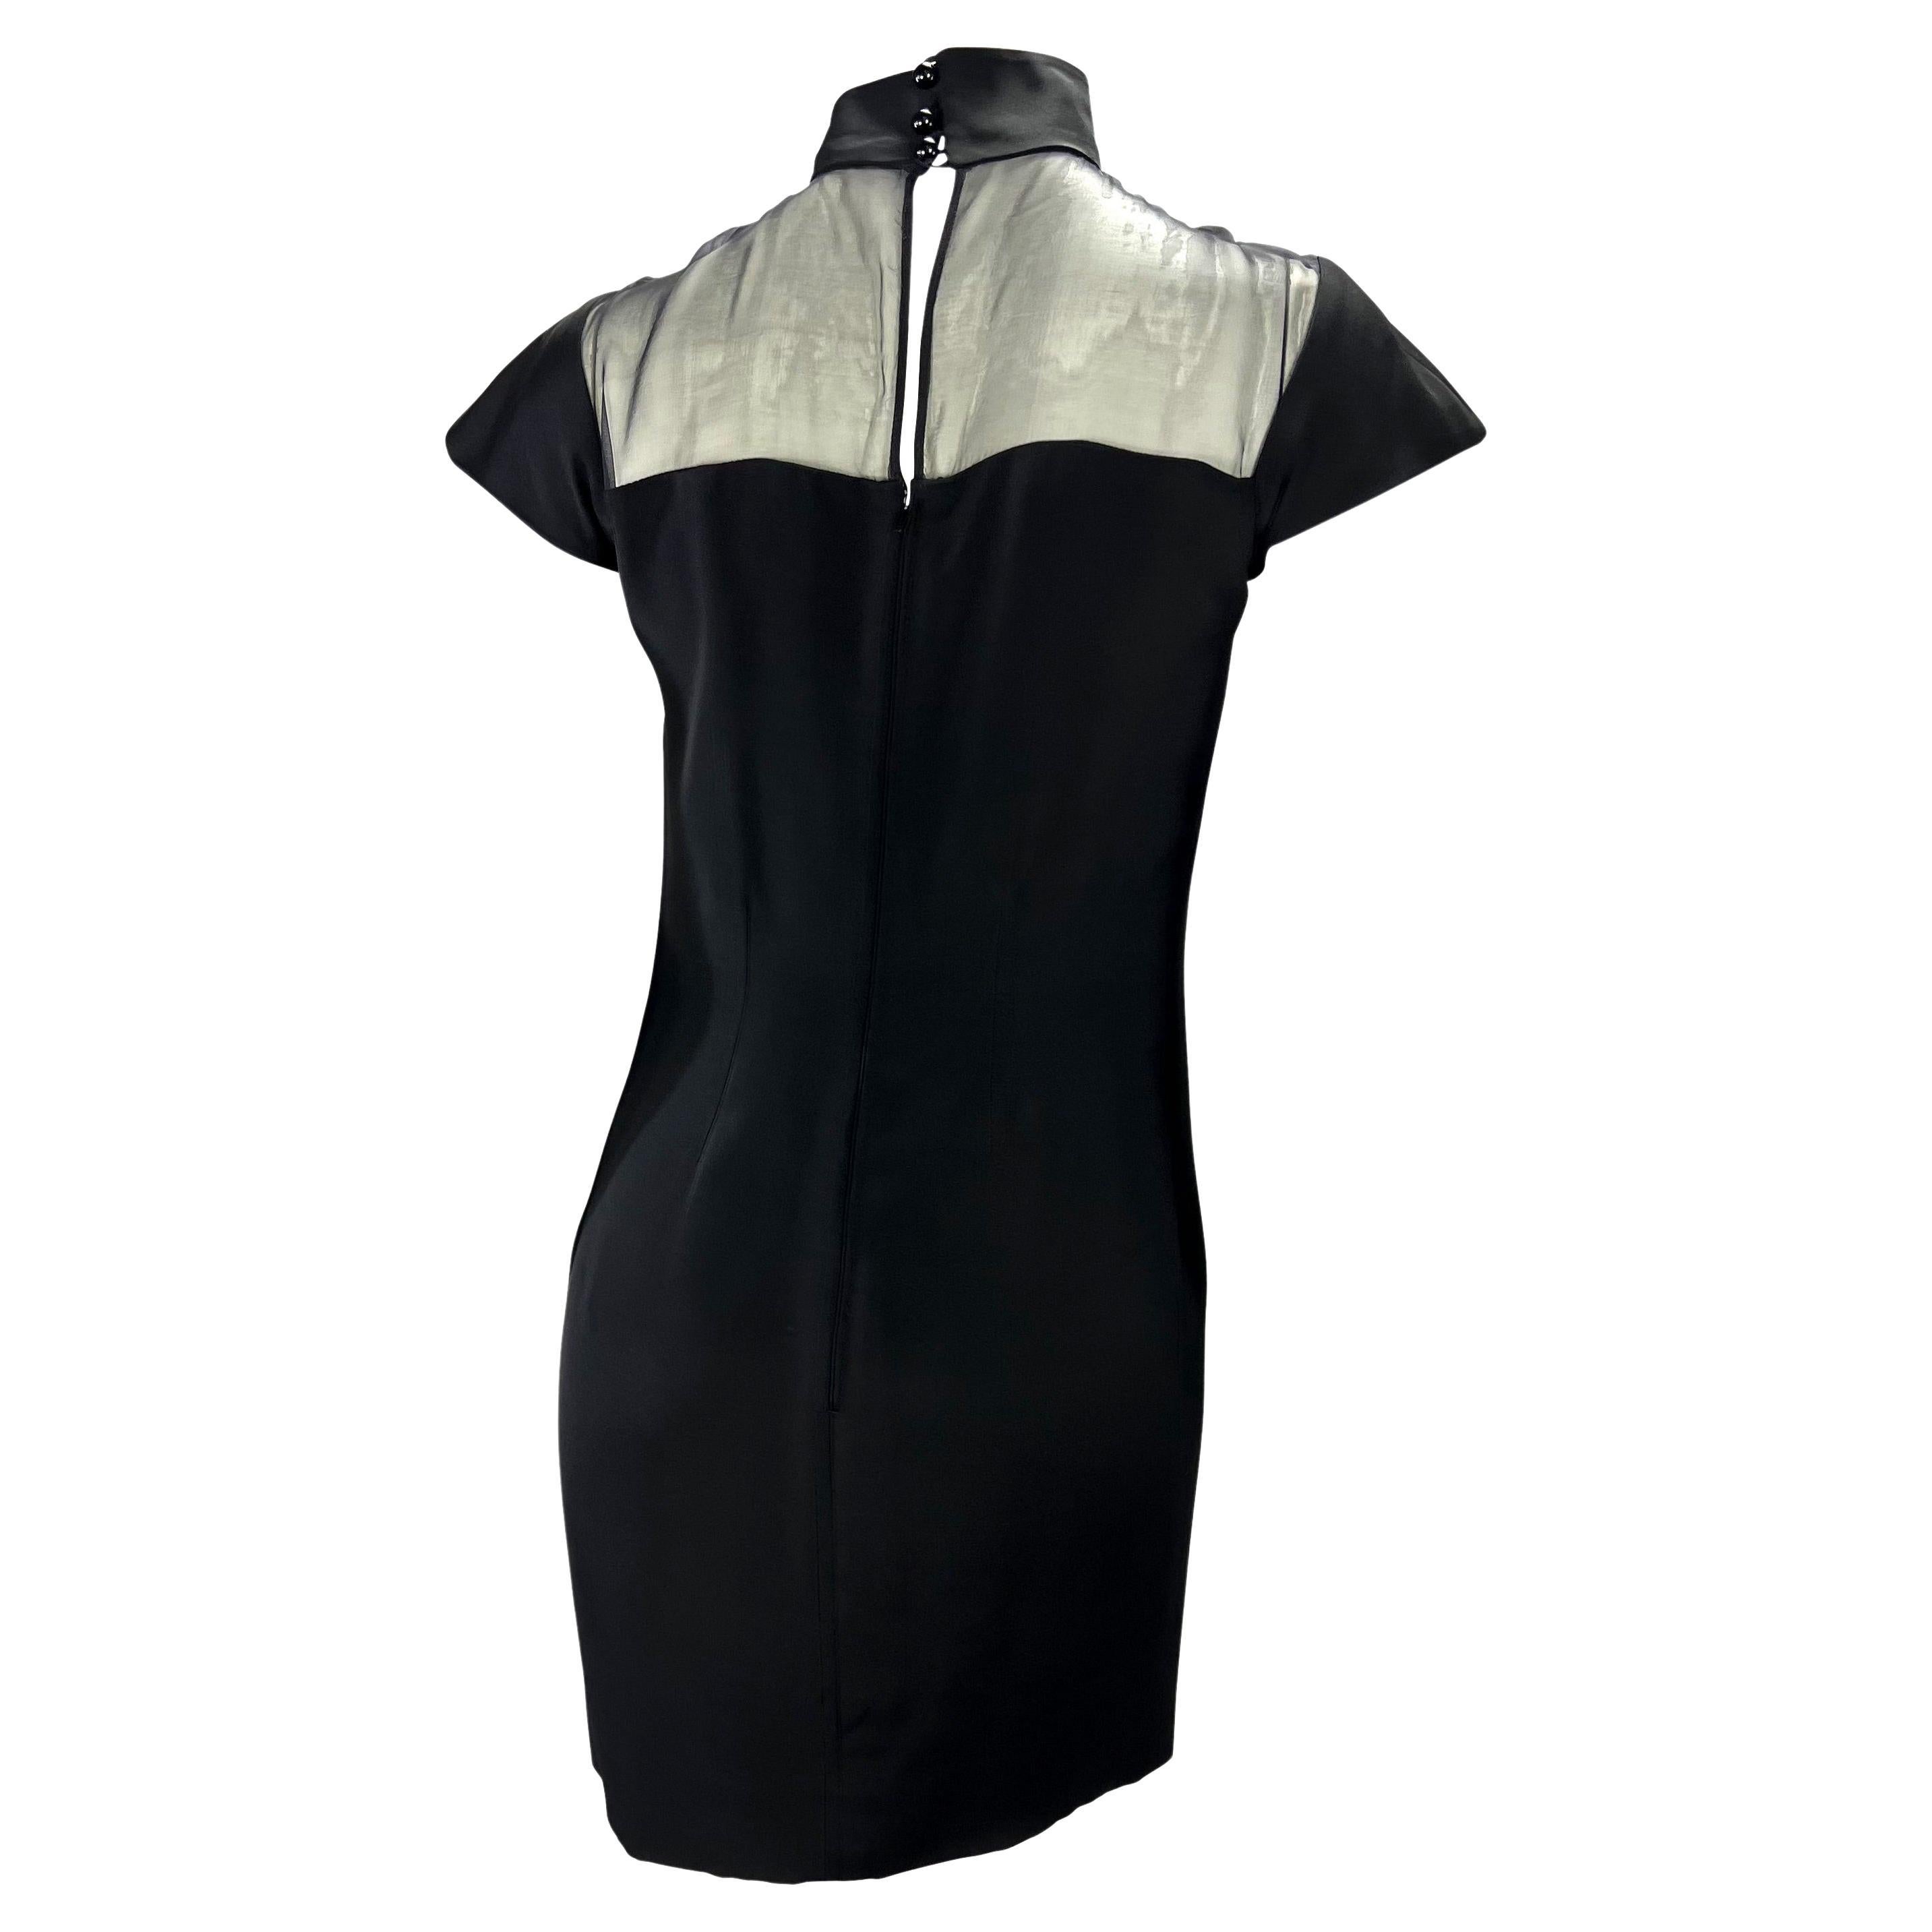 S/S 1989 Valentino Garavani Ad Campaign Black Sheer Panel Bodycon Cocktail Dress In Good Condition For Sale In West Hollywood, CA